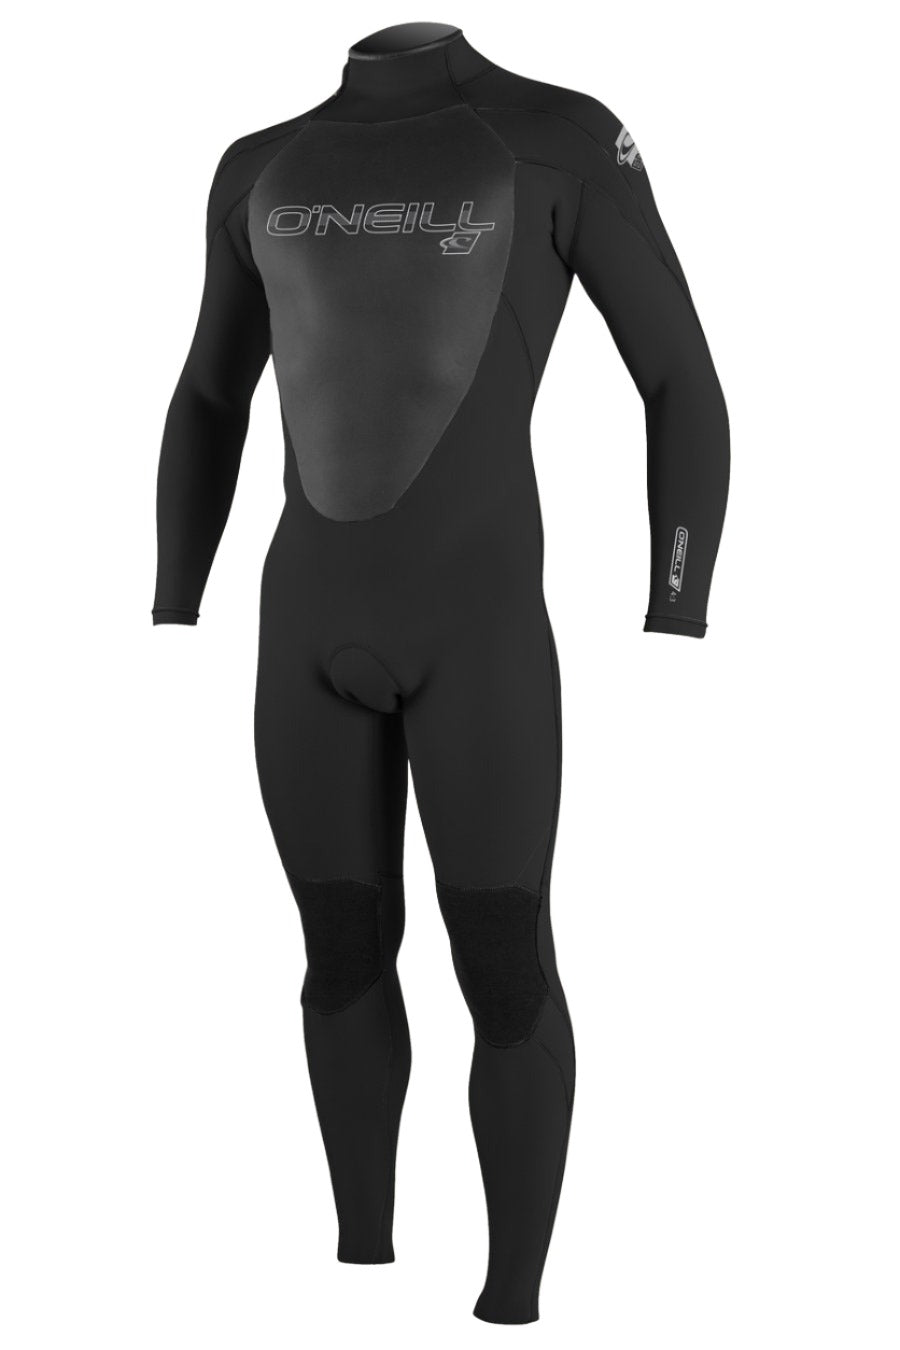 O'NEILL YOUTH 3/2MM EPIC BACK ZIP WETSUIT